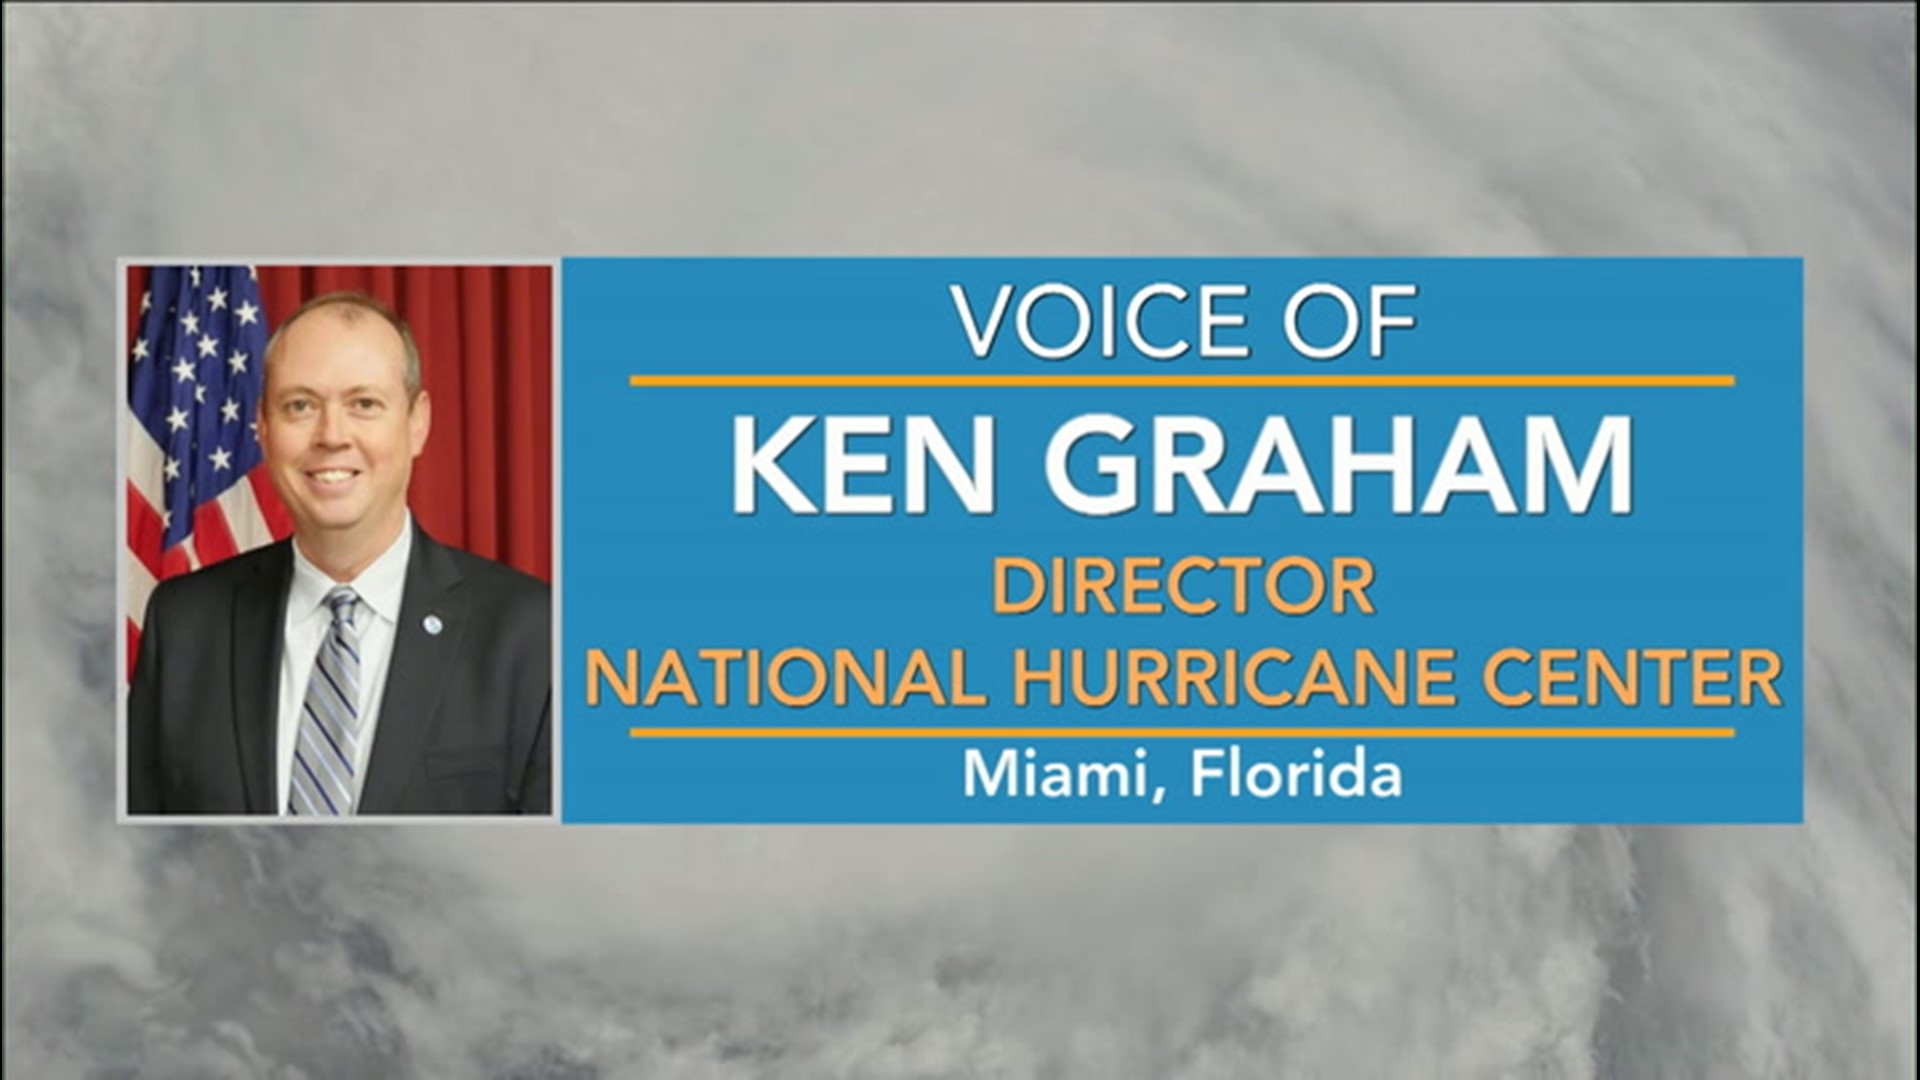 Director of the National Hurricane Center, Ken Graham, talks to AccuWeather's Bernie Rayno about the deadliest aspects of hurricanes. Graham says water has accounted for more than 83% of hurricane-related fatalities in the last three years alone. About half of all deaths in hurricanes come from storm surge.